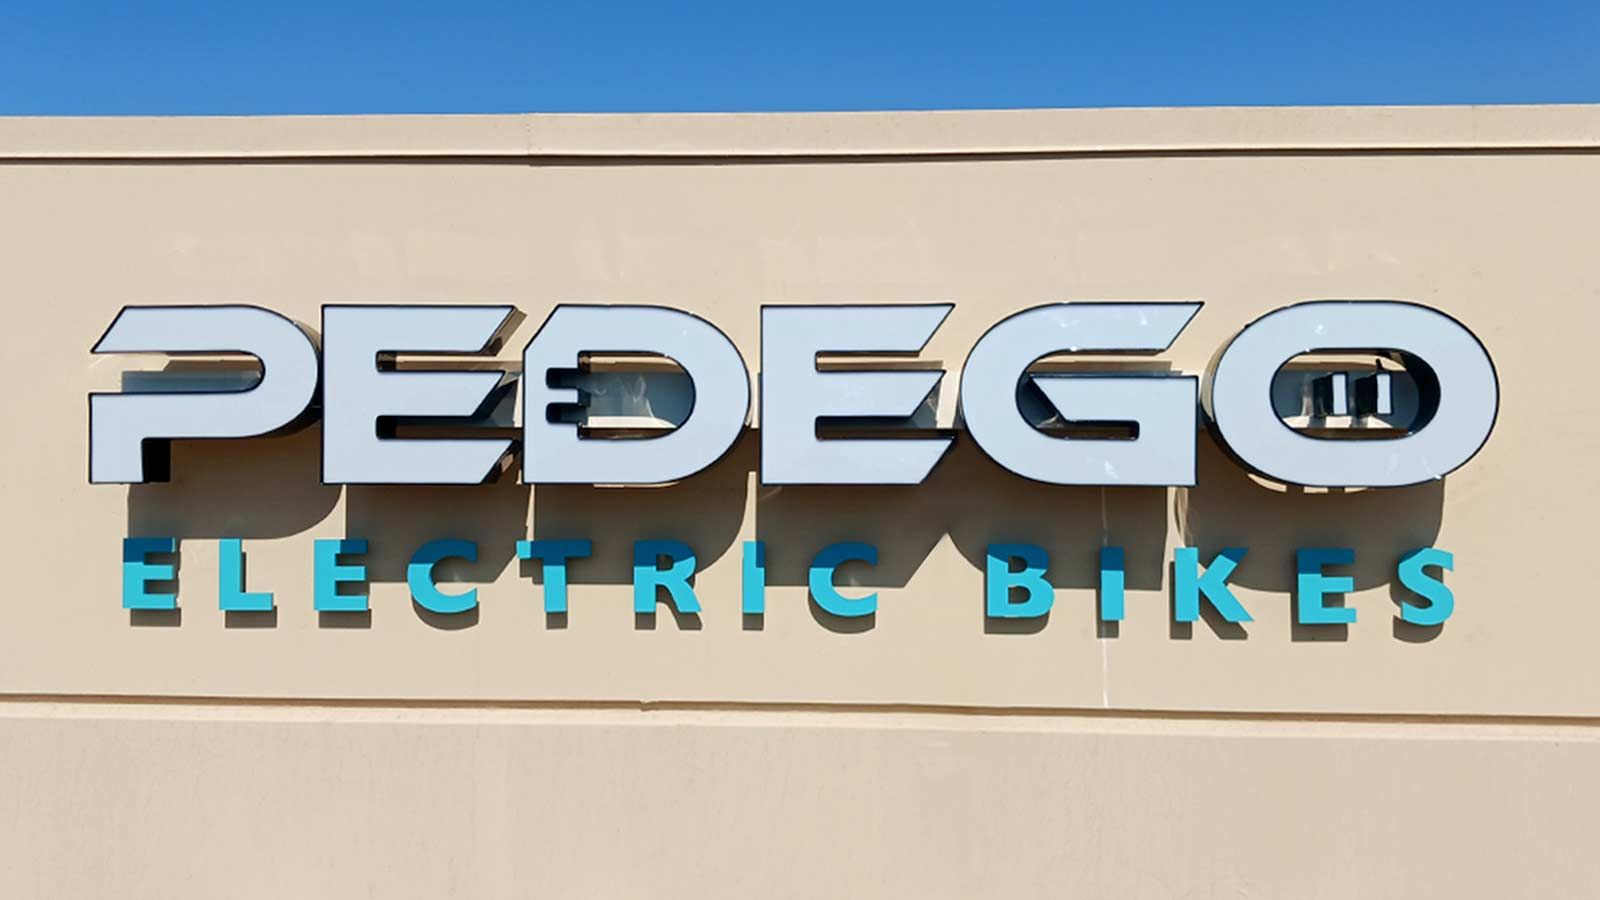 Pedego Electric Bikes signs attached to the building wall